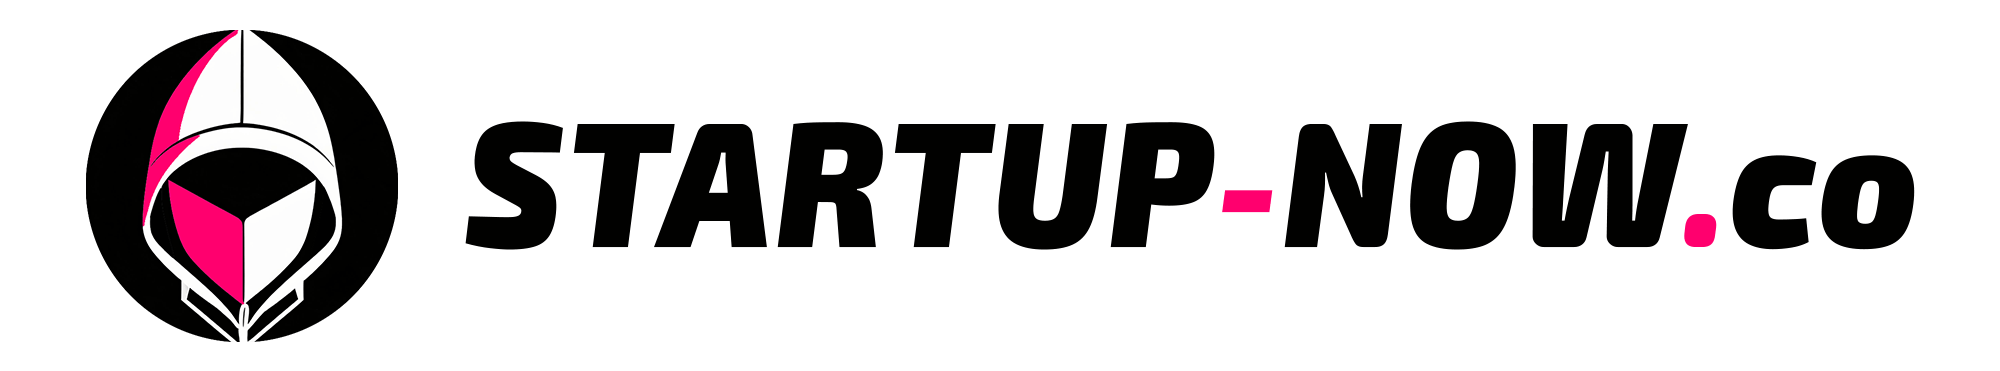 Startup-Now.co